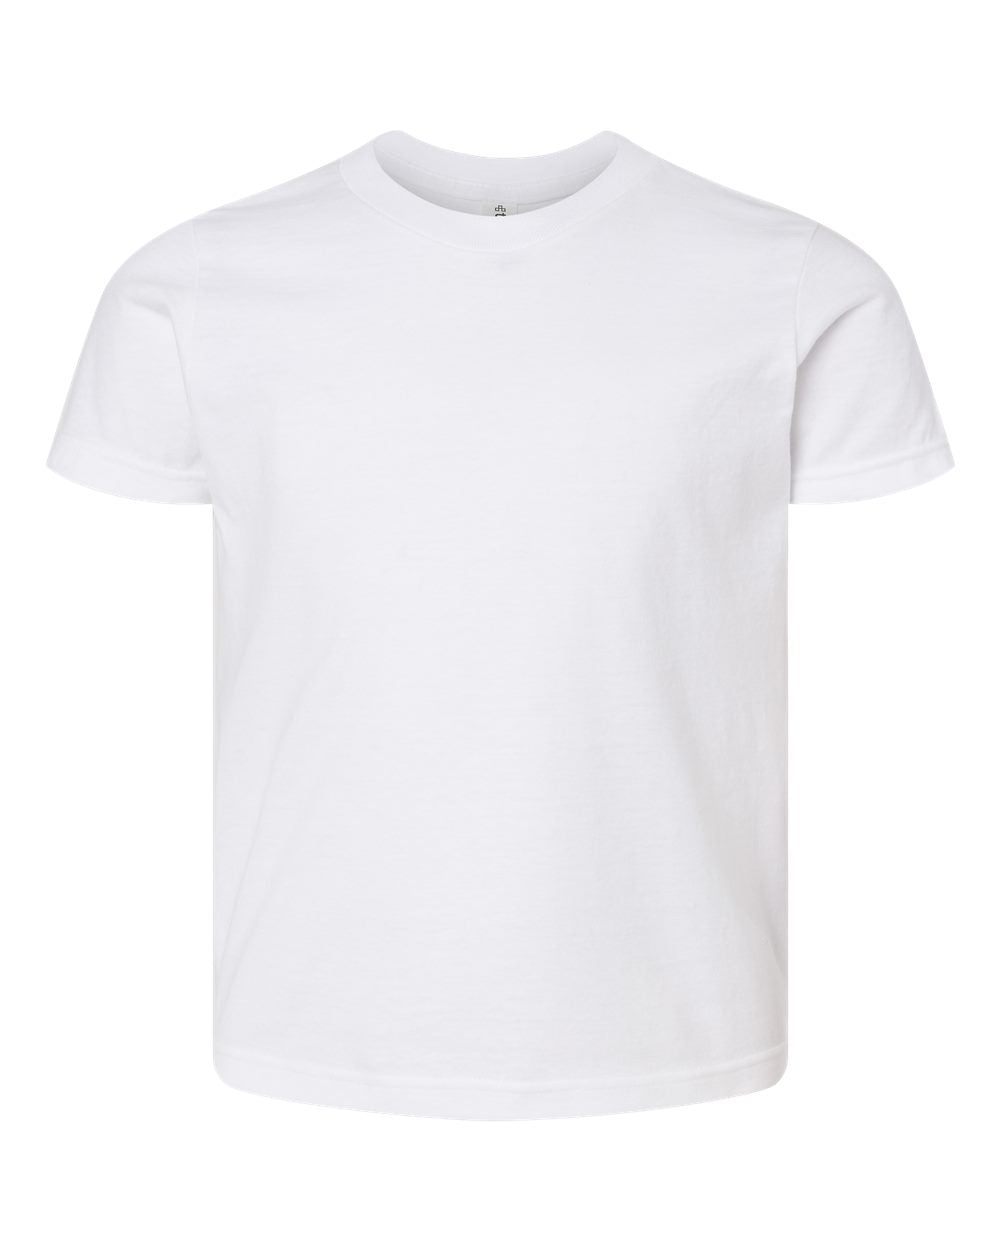 White - Tultex - Youth T-Shirt 235